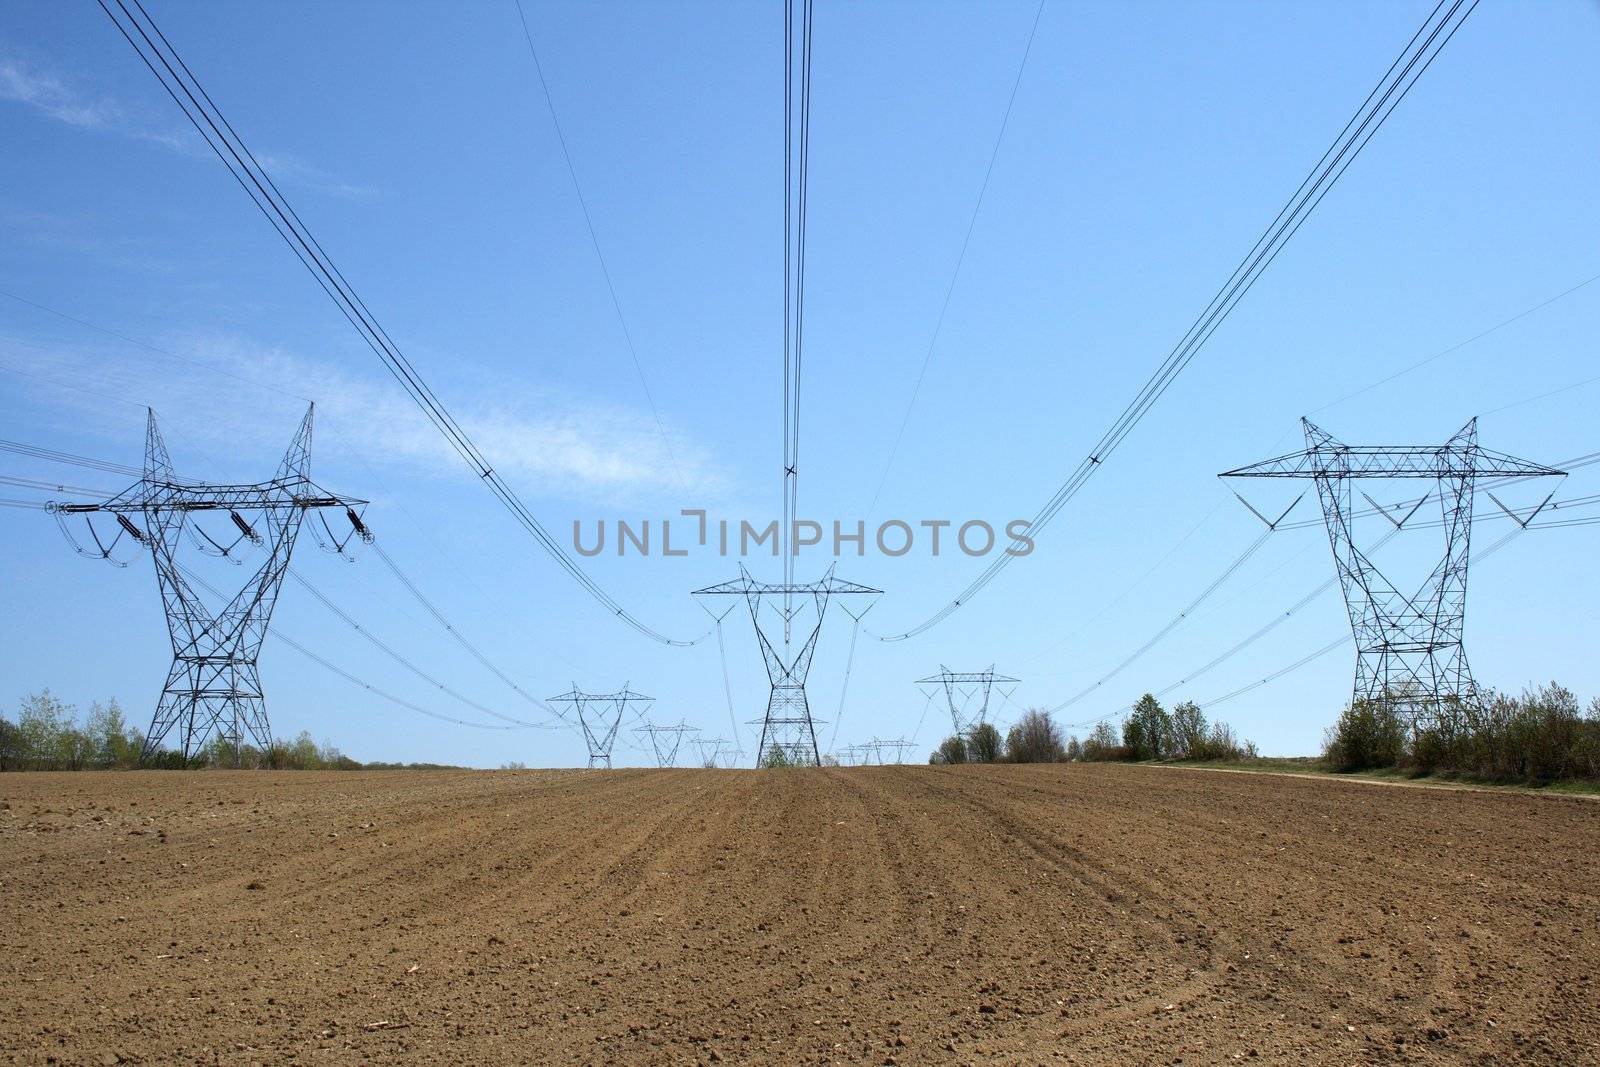 Nature and technology. Ploughed land ready for cultivation and electricity pylons.